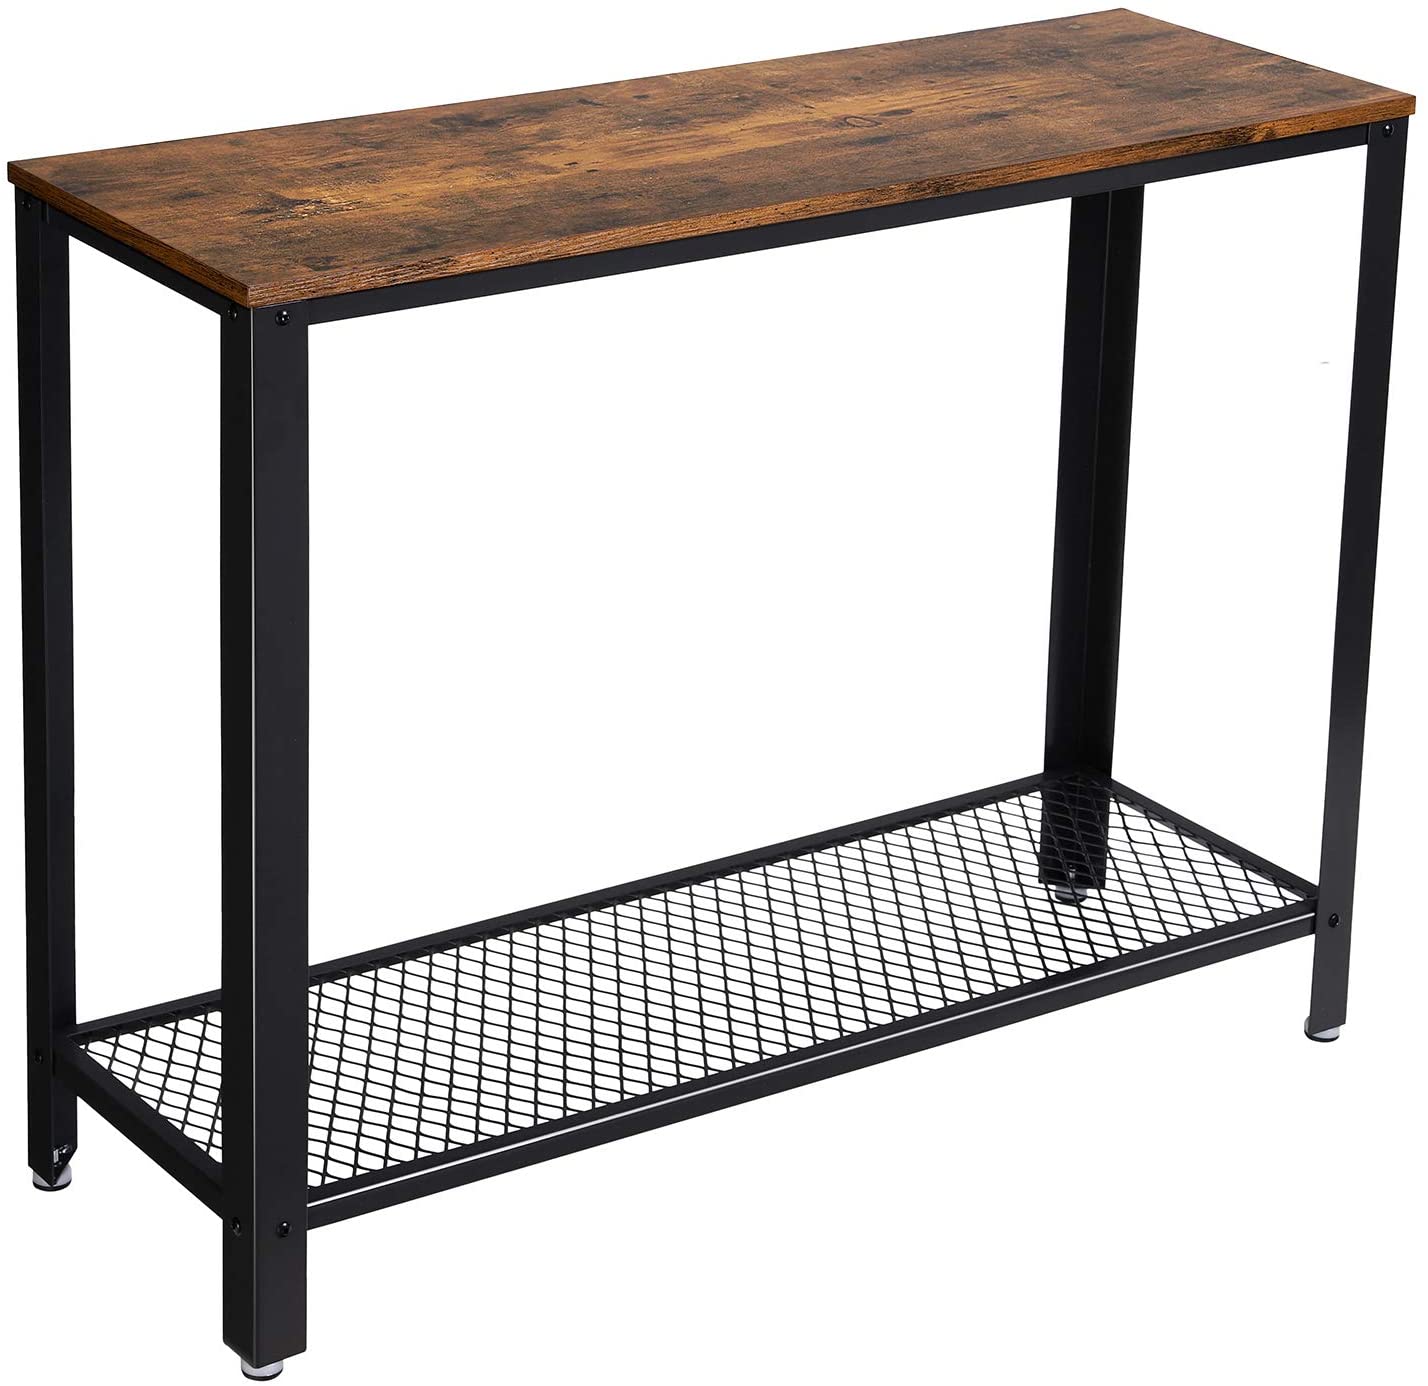 VASAGLE Space-Saving Industrial Console Table For Entryway